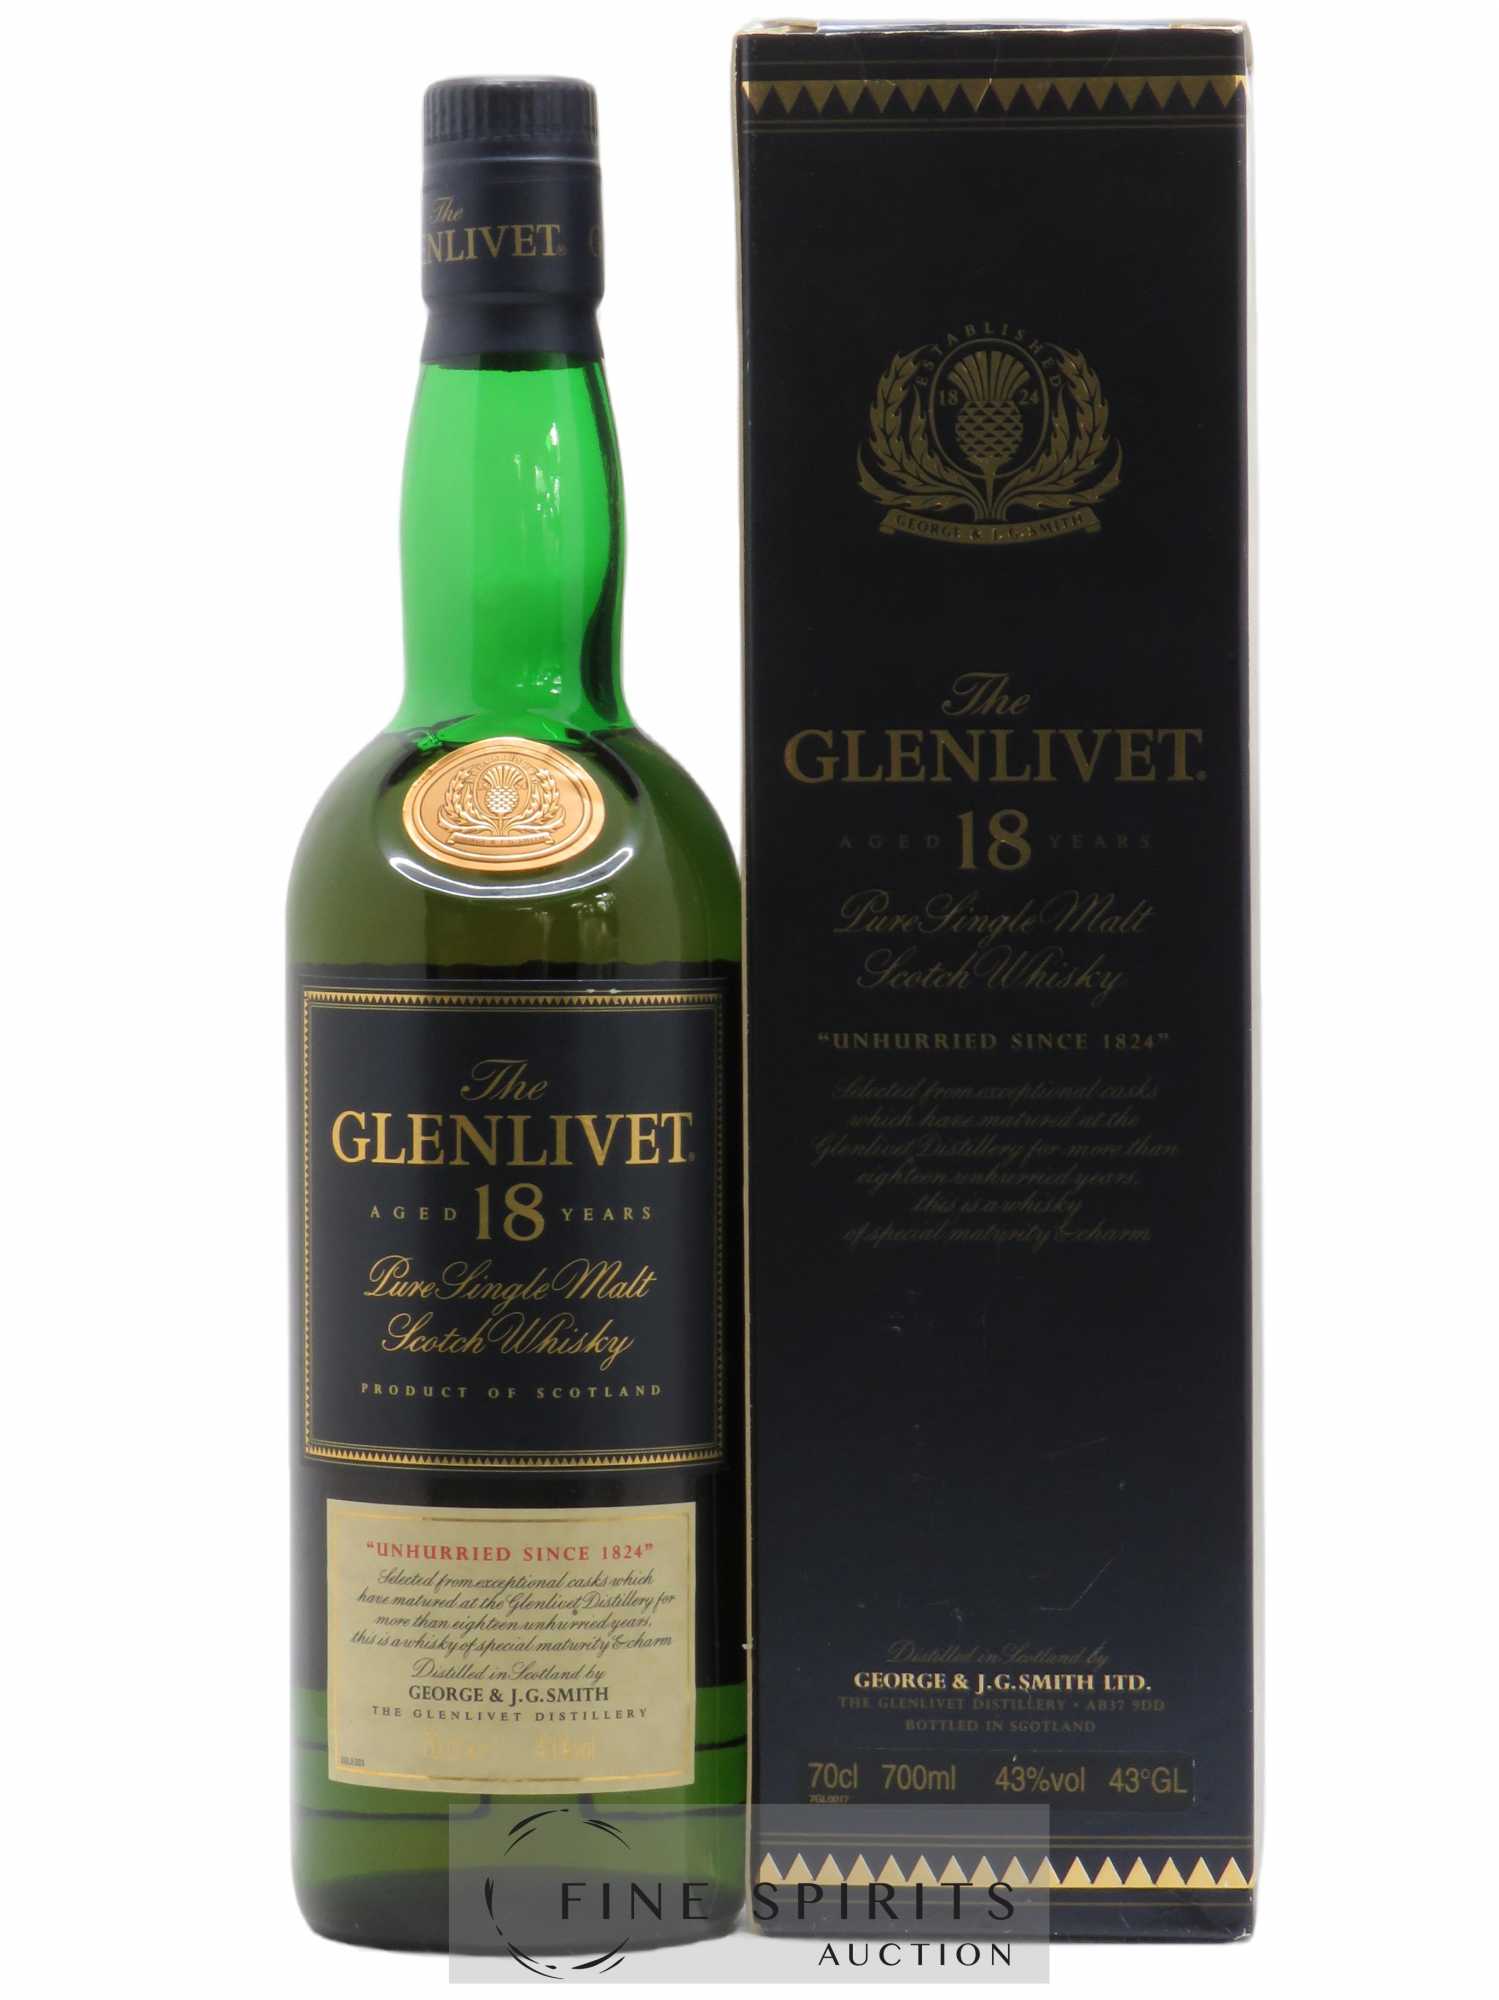 Glenlivet 18 years Of. two-part label unhurried since 1824